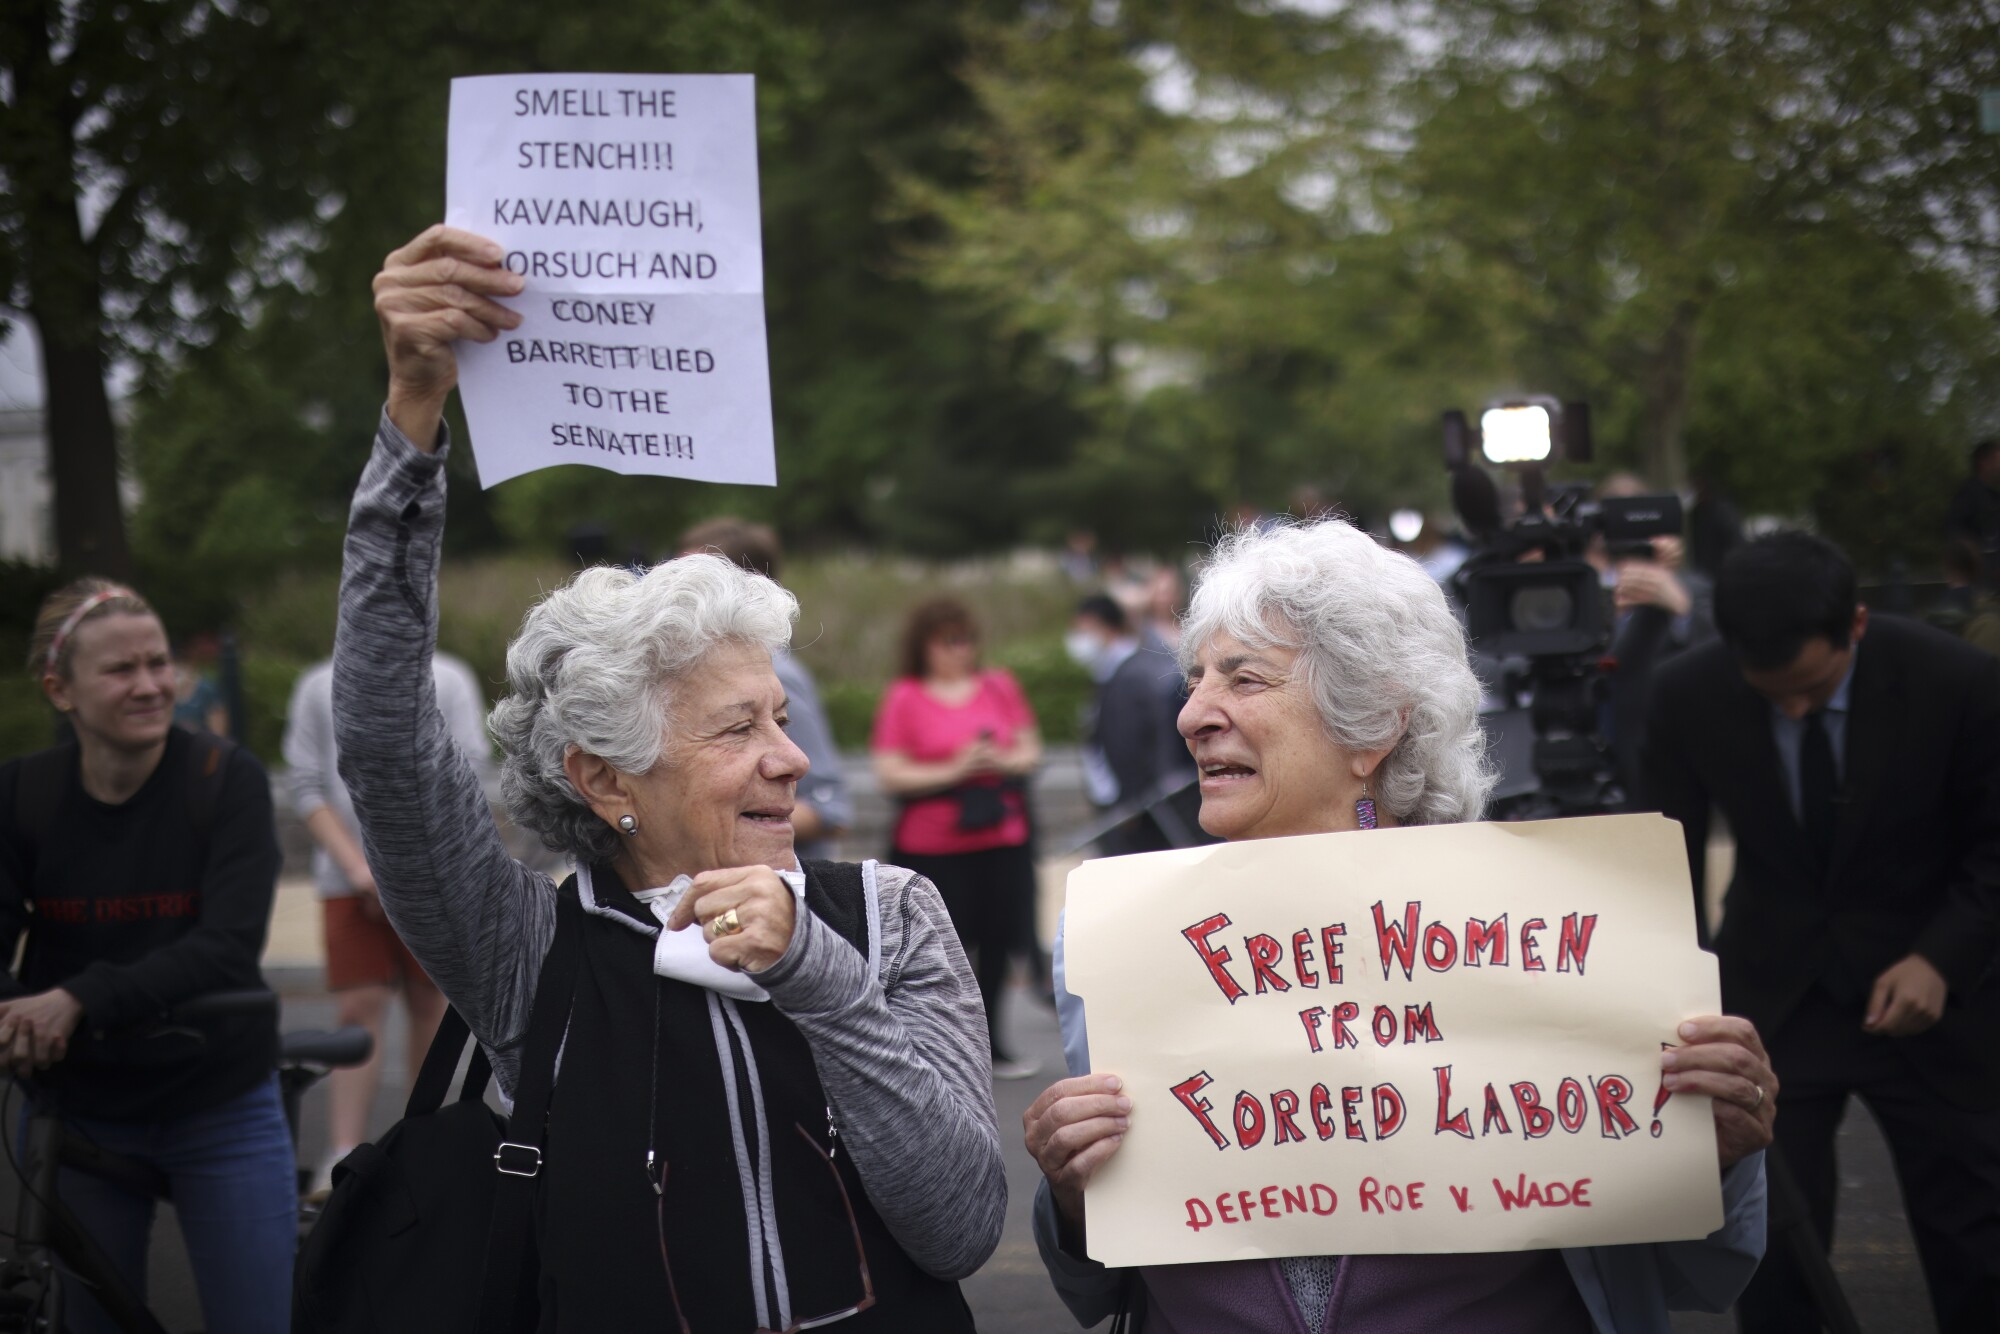 Roberta Shapiro, left, and Kim Fellner demonstrate in front of the U.S. Supreme Court Building on May 03, 2022 